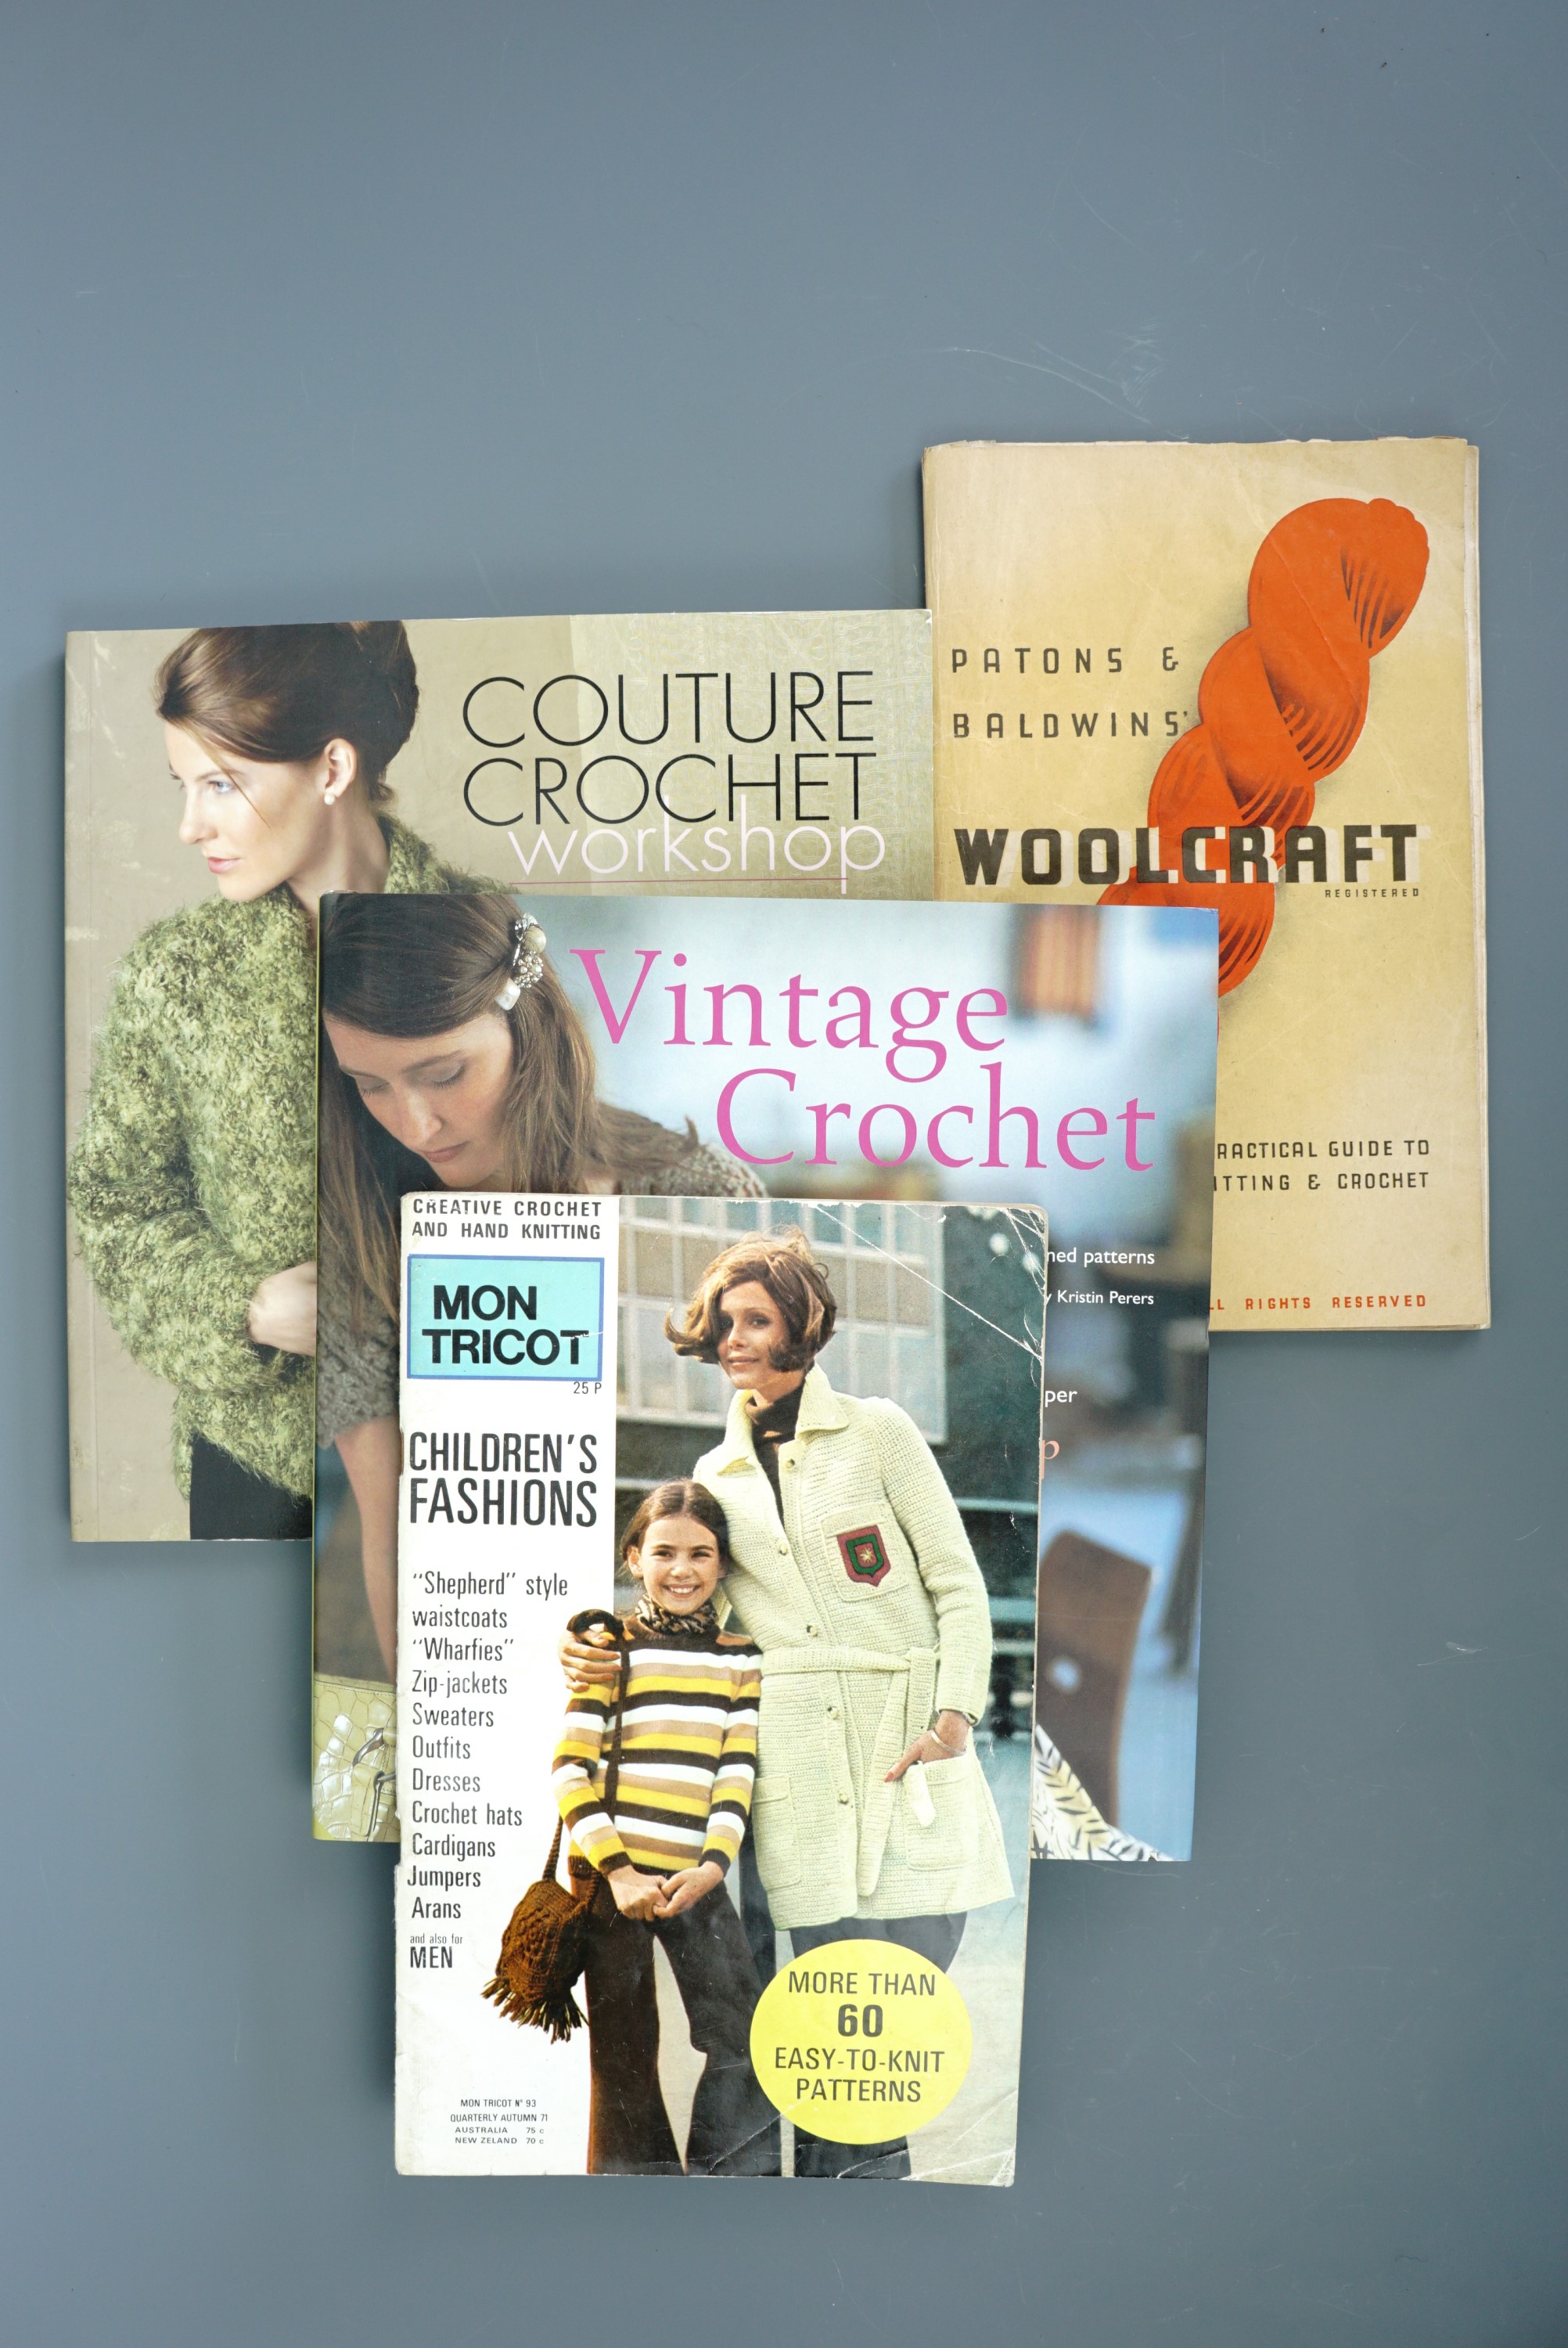 A quantity of books on woolcraft, knitting and crochet